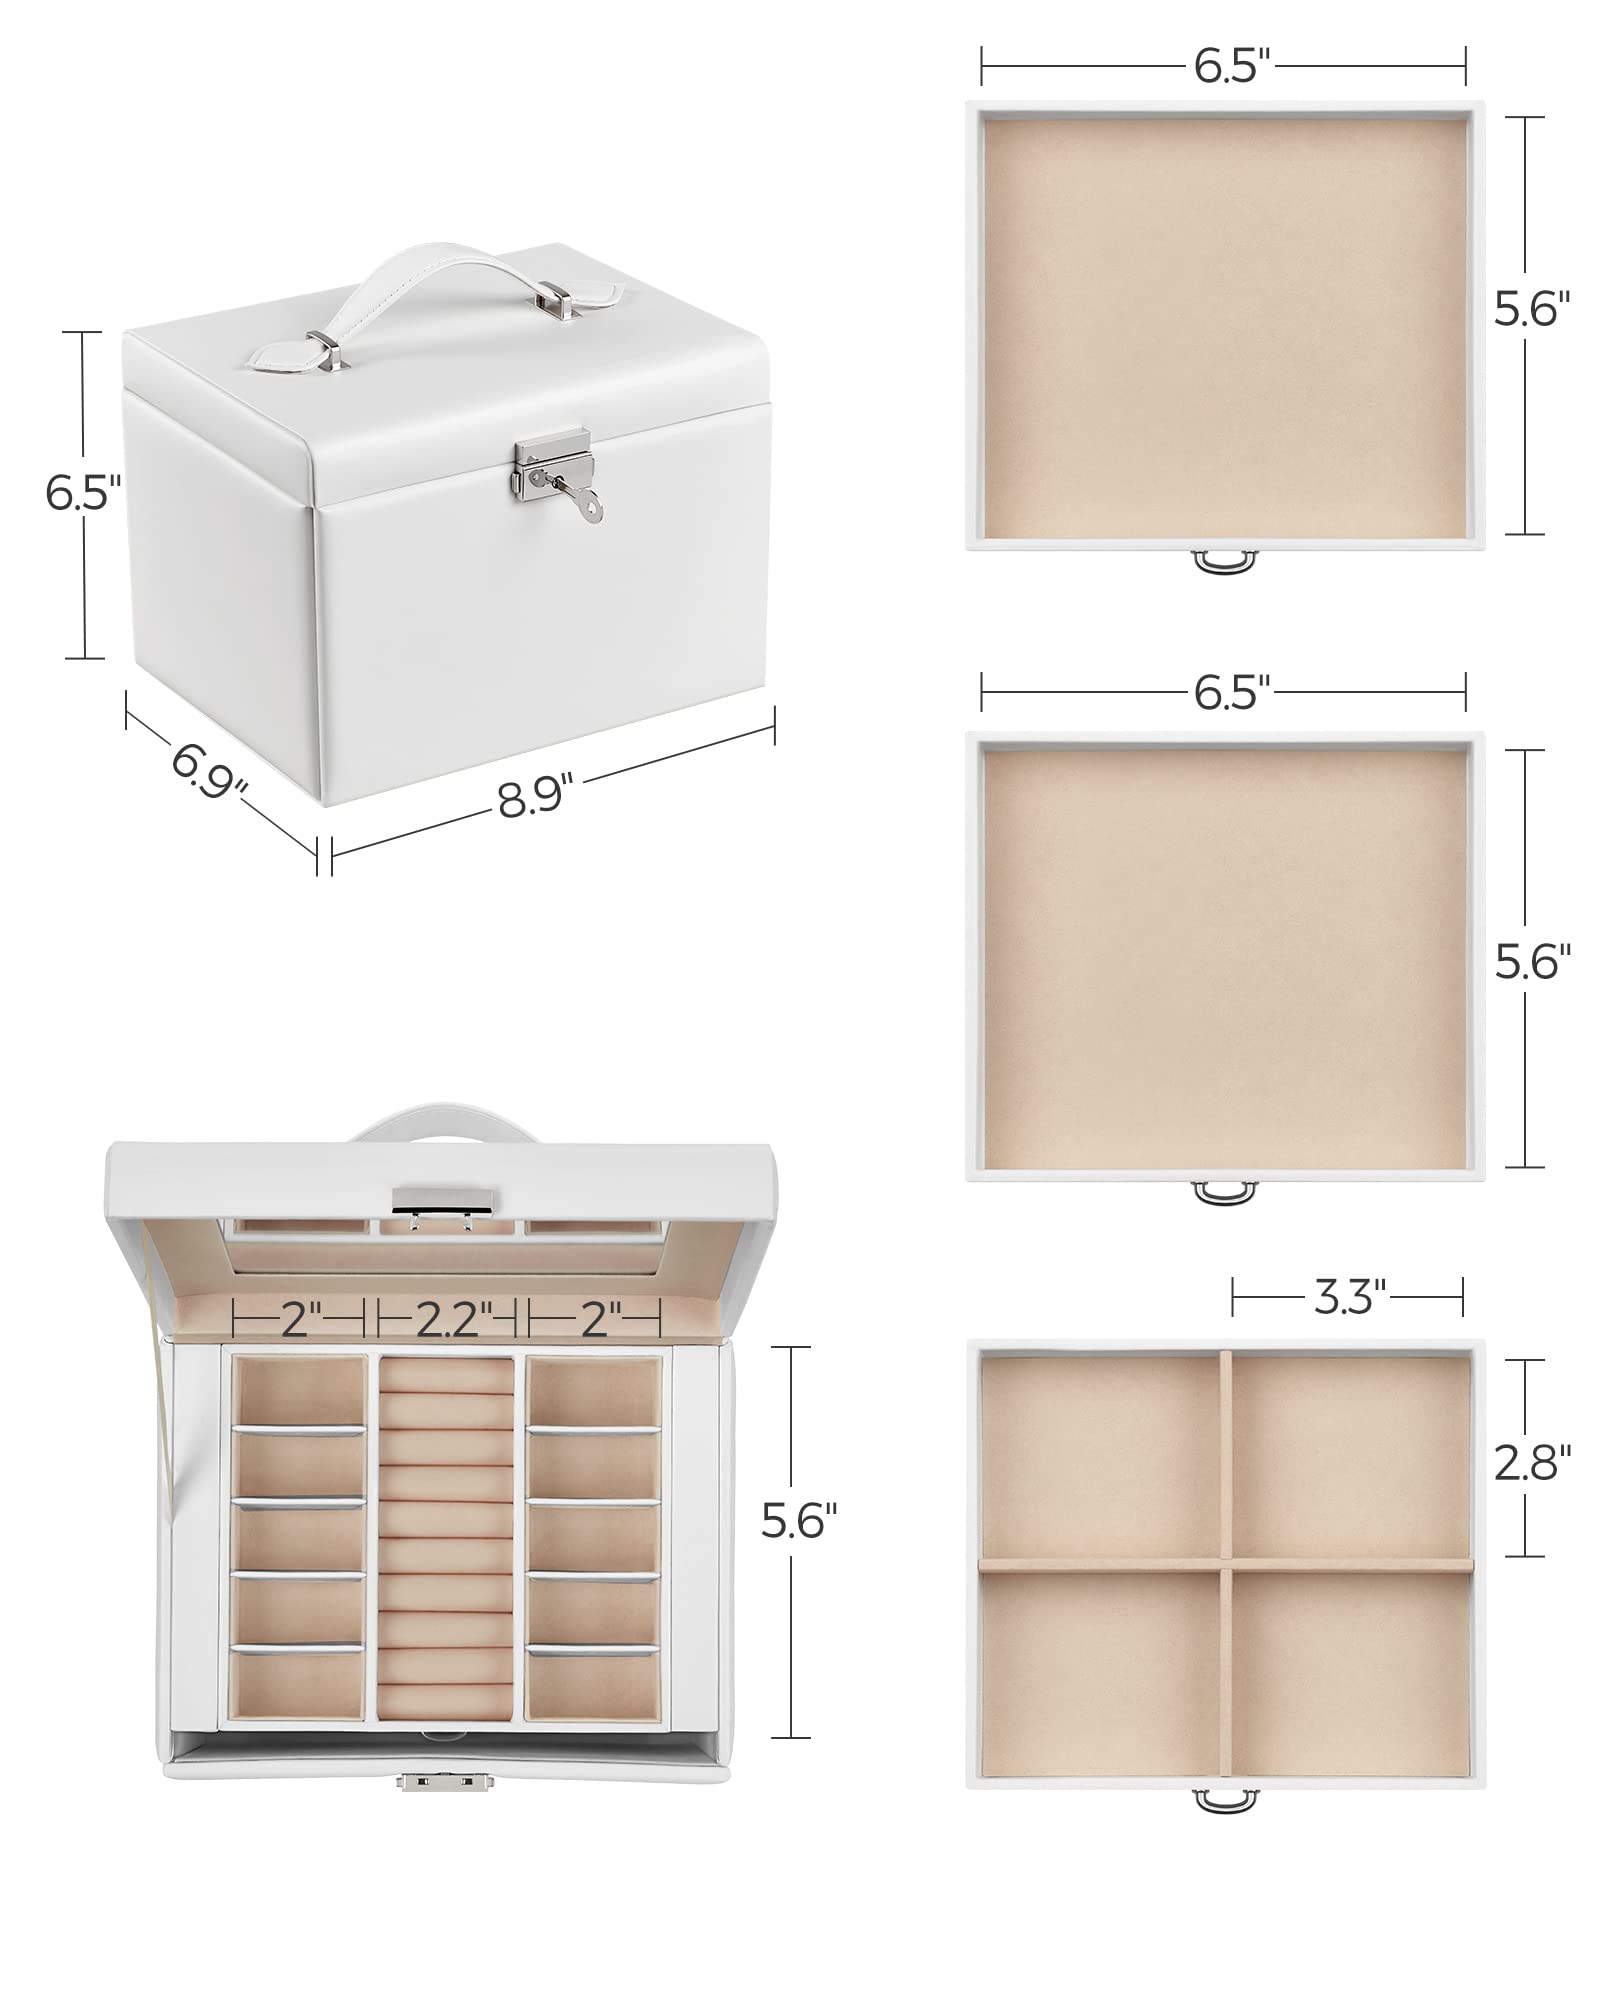 SONGMICS 4-Tier Jewelry Box, Lockable Jewelry Organizer with Handle, 3 Drawers, Travel Jewelry Case with Mirror, Jewelry Storage, Modern Style, Gift for Loved Ones, White UJBC159W01